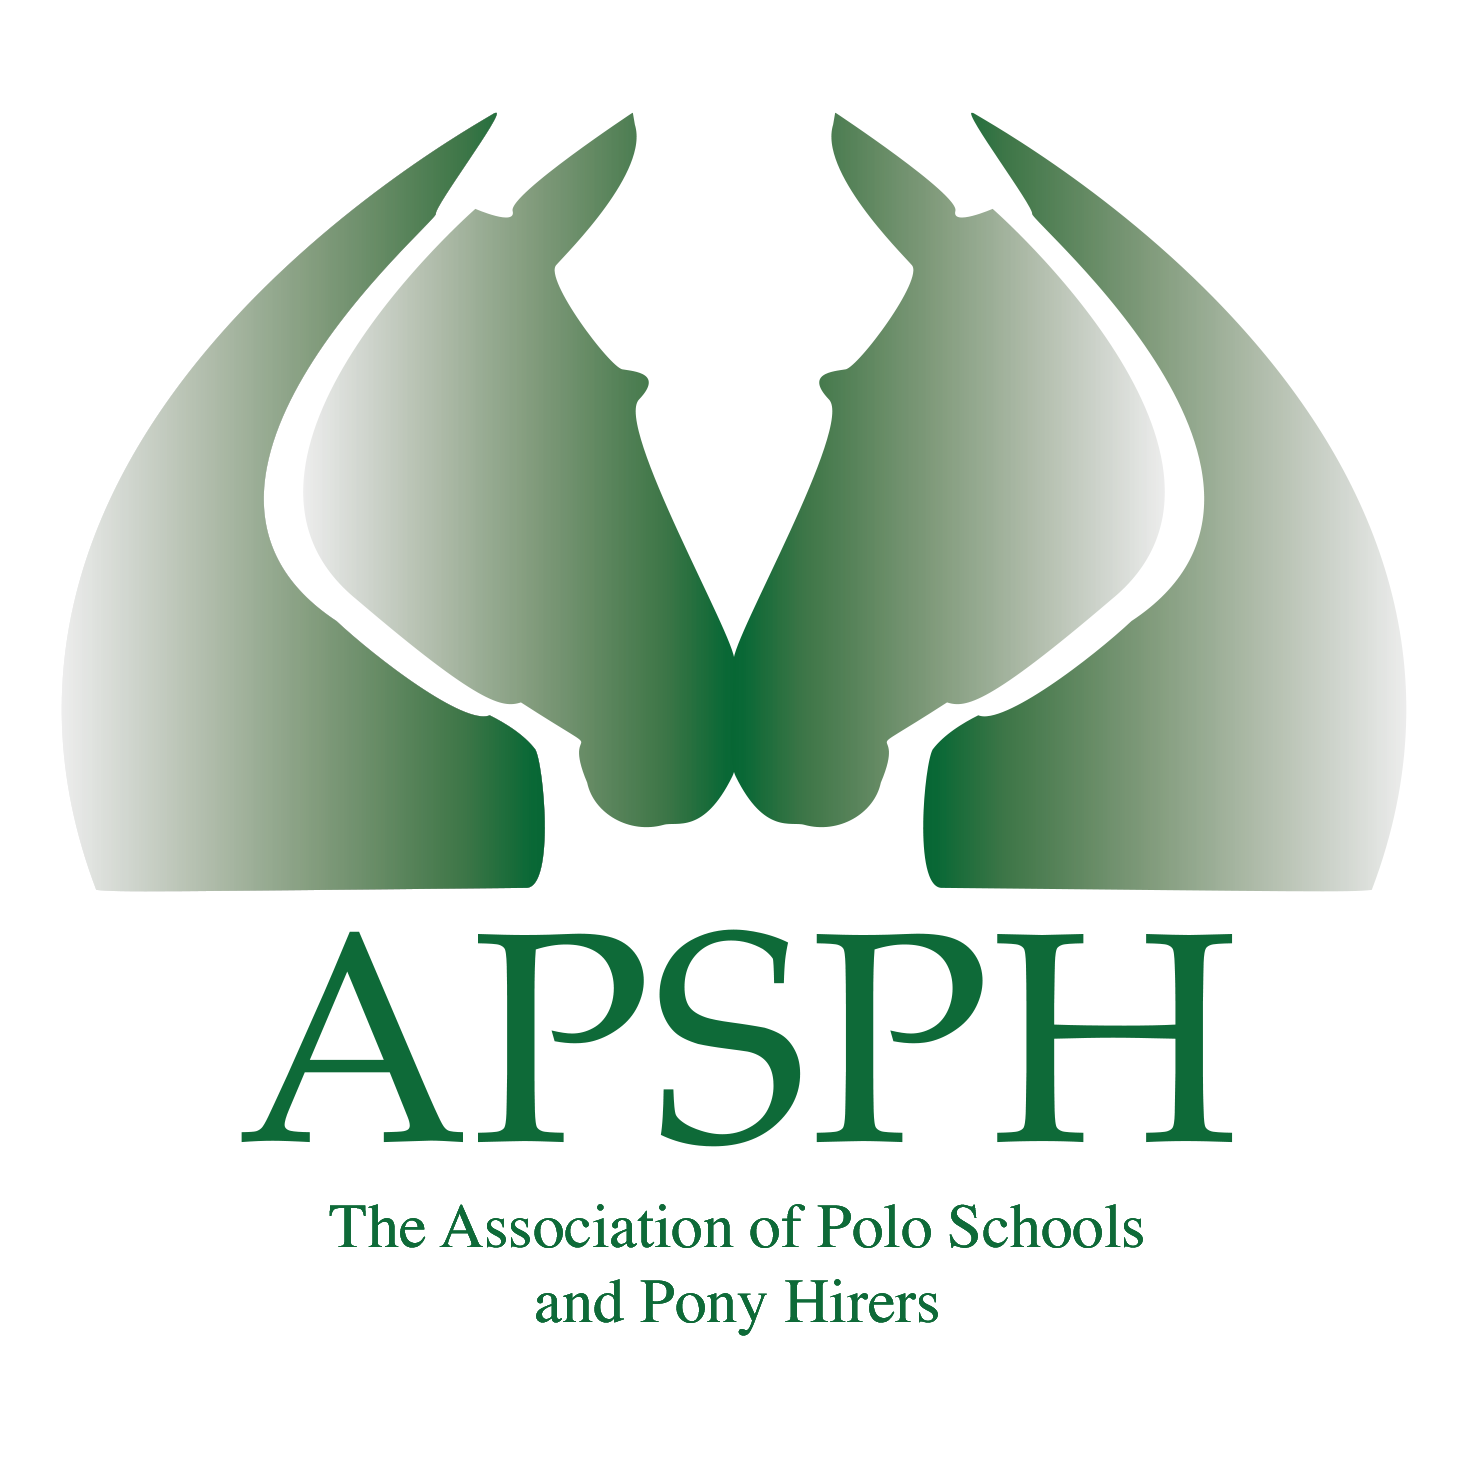 The Association of Polo Schools and Pony Hirers